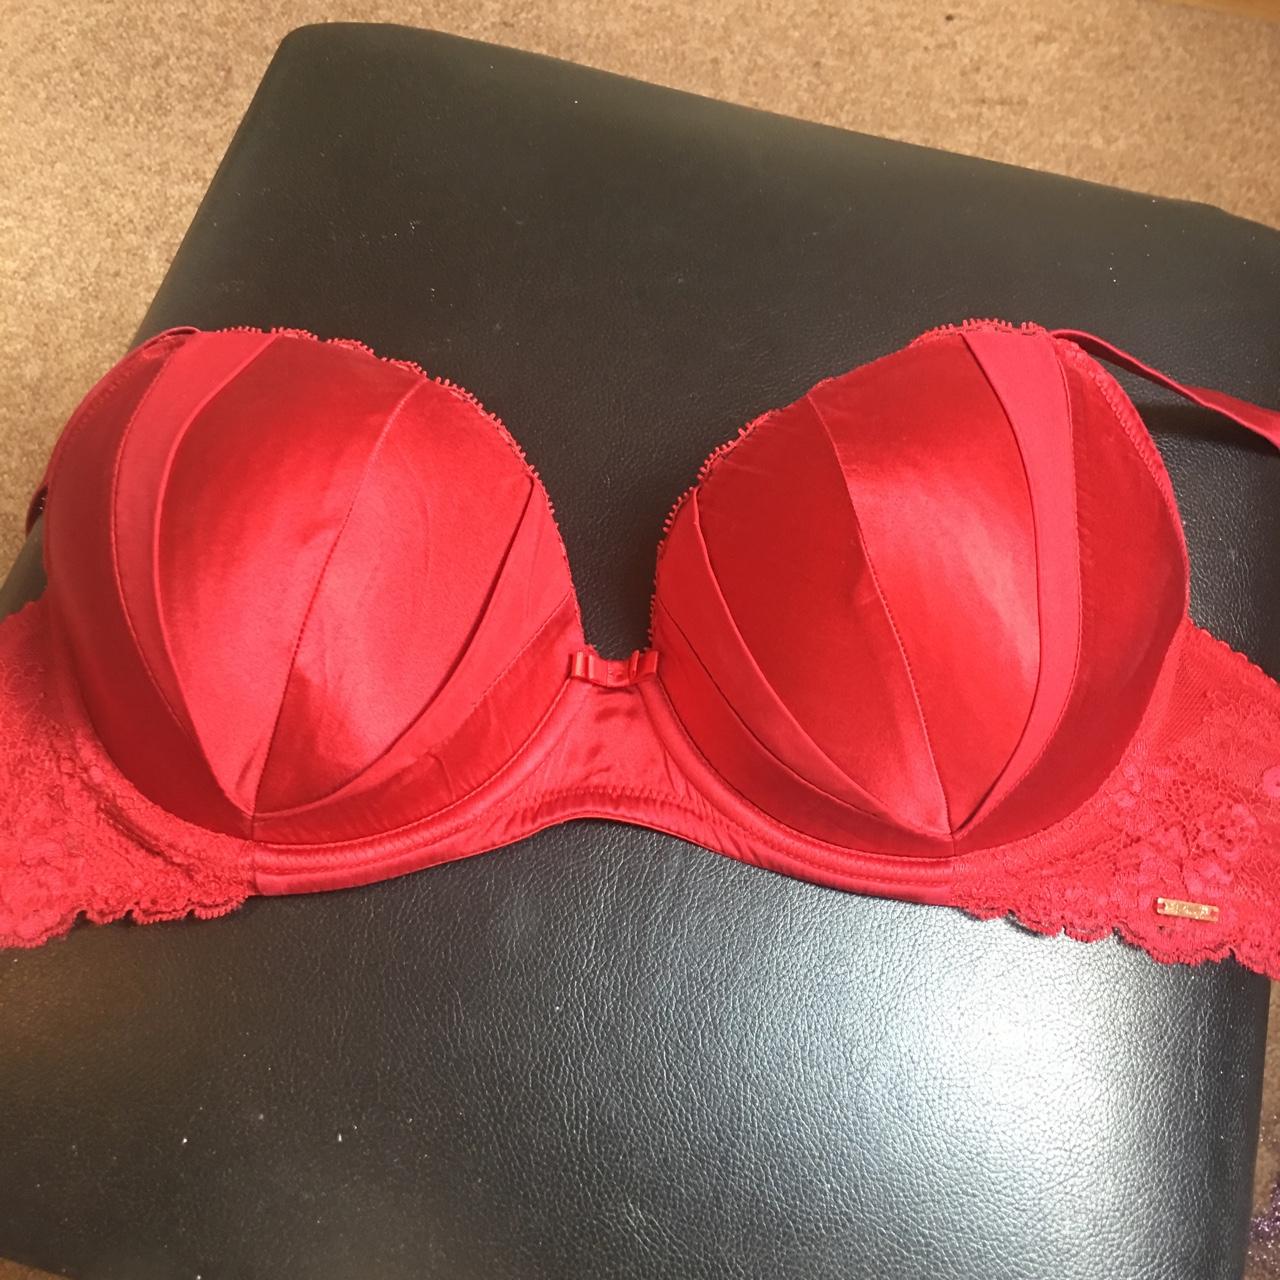 RED SATIN BRA - Size 34D - New Without Tags - Depop